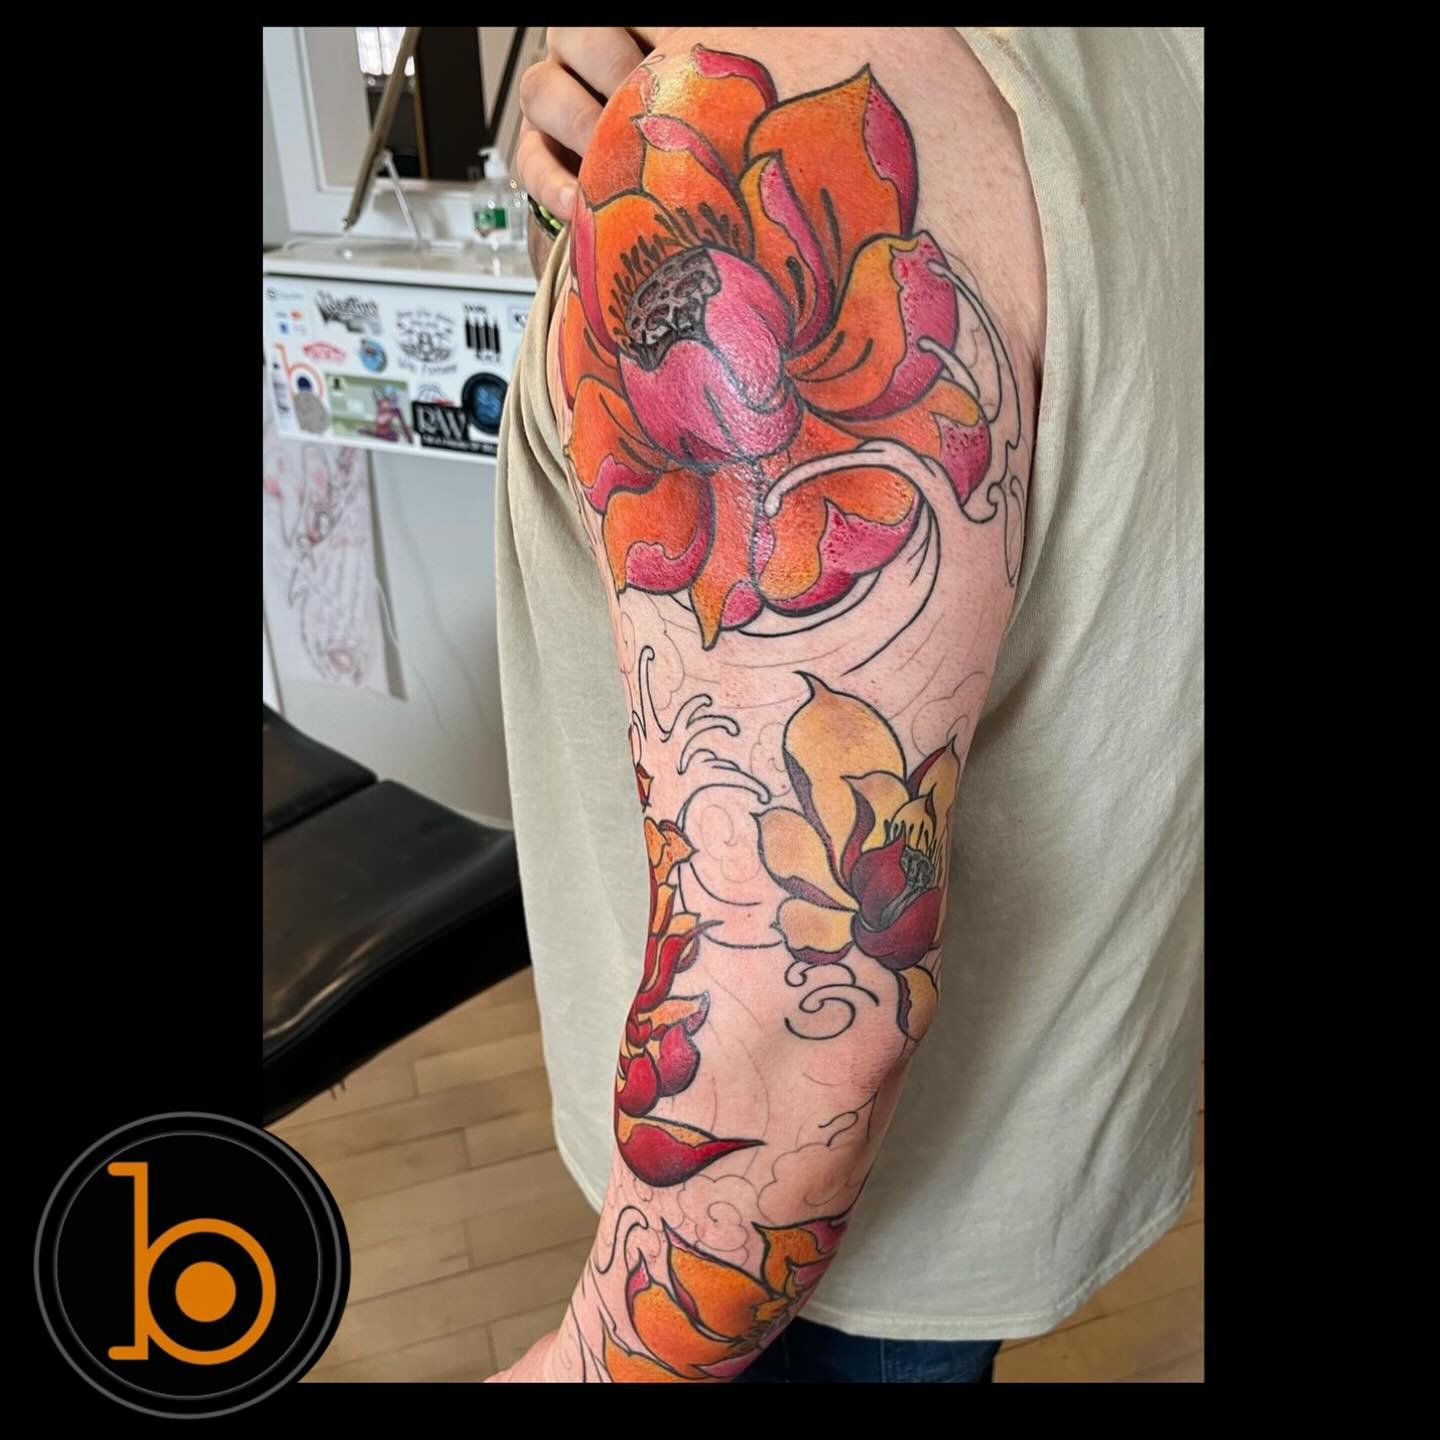 Some more progress on this beautiful sleeve by resident artist @slotapop 🌸🌺
➖➖➖➖➖➖➖➖➖➖➖➖➖➖➖➖➖
Blueprint Gallery
138 Russell St
 Hadley MA 01035
📱(413)-387-0221 
WALK-INS WELCOME 
🕸️ www.blueprintgallery.com 🕸️
⬇️⬇️⬇️⬇️⬇️⬇️⬇️⬇️⬇️⬇️⬇️⬇️⬇️
Made usi